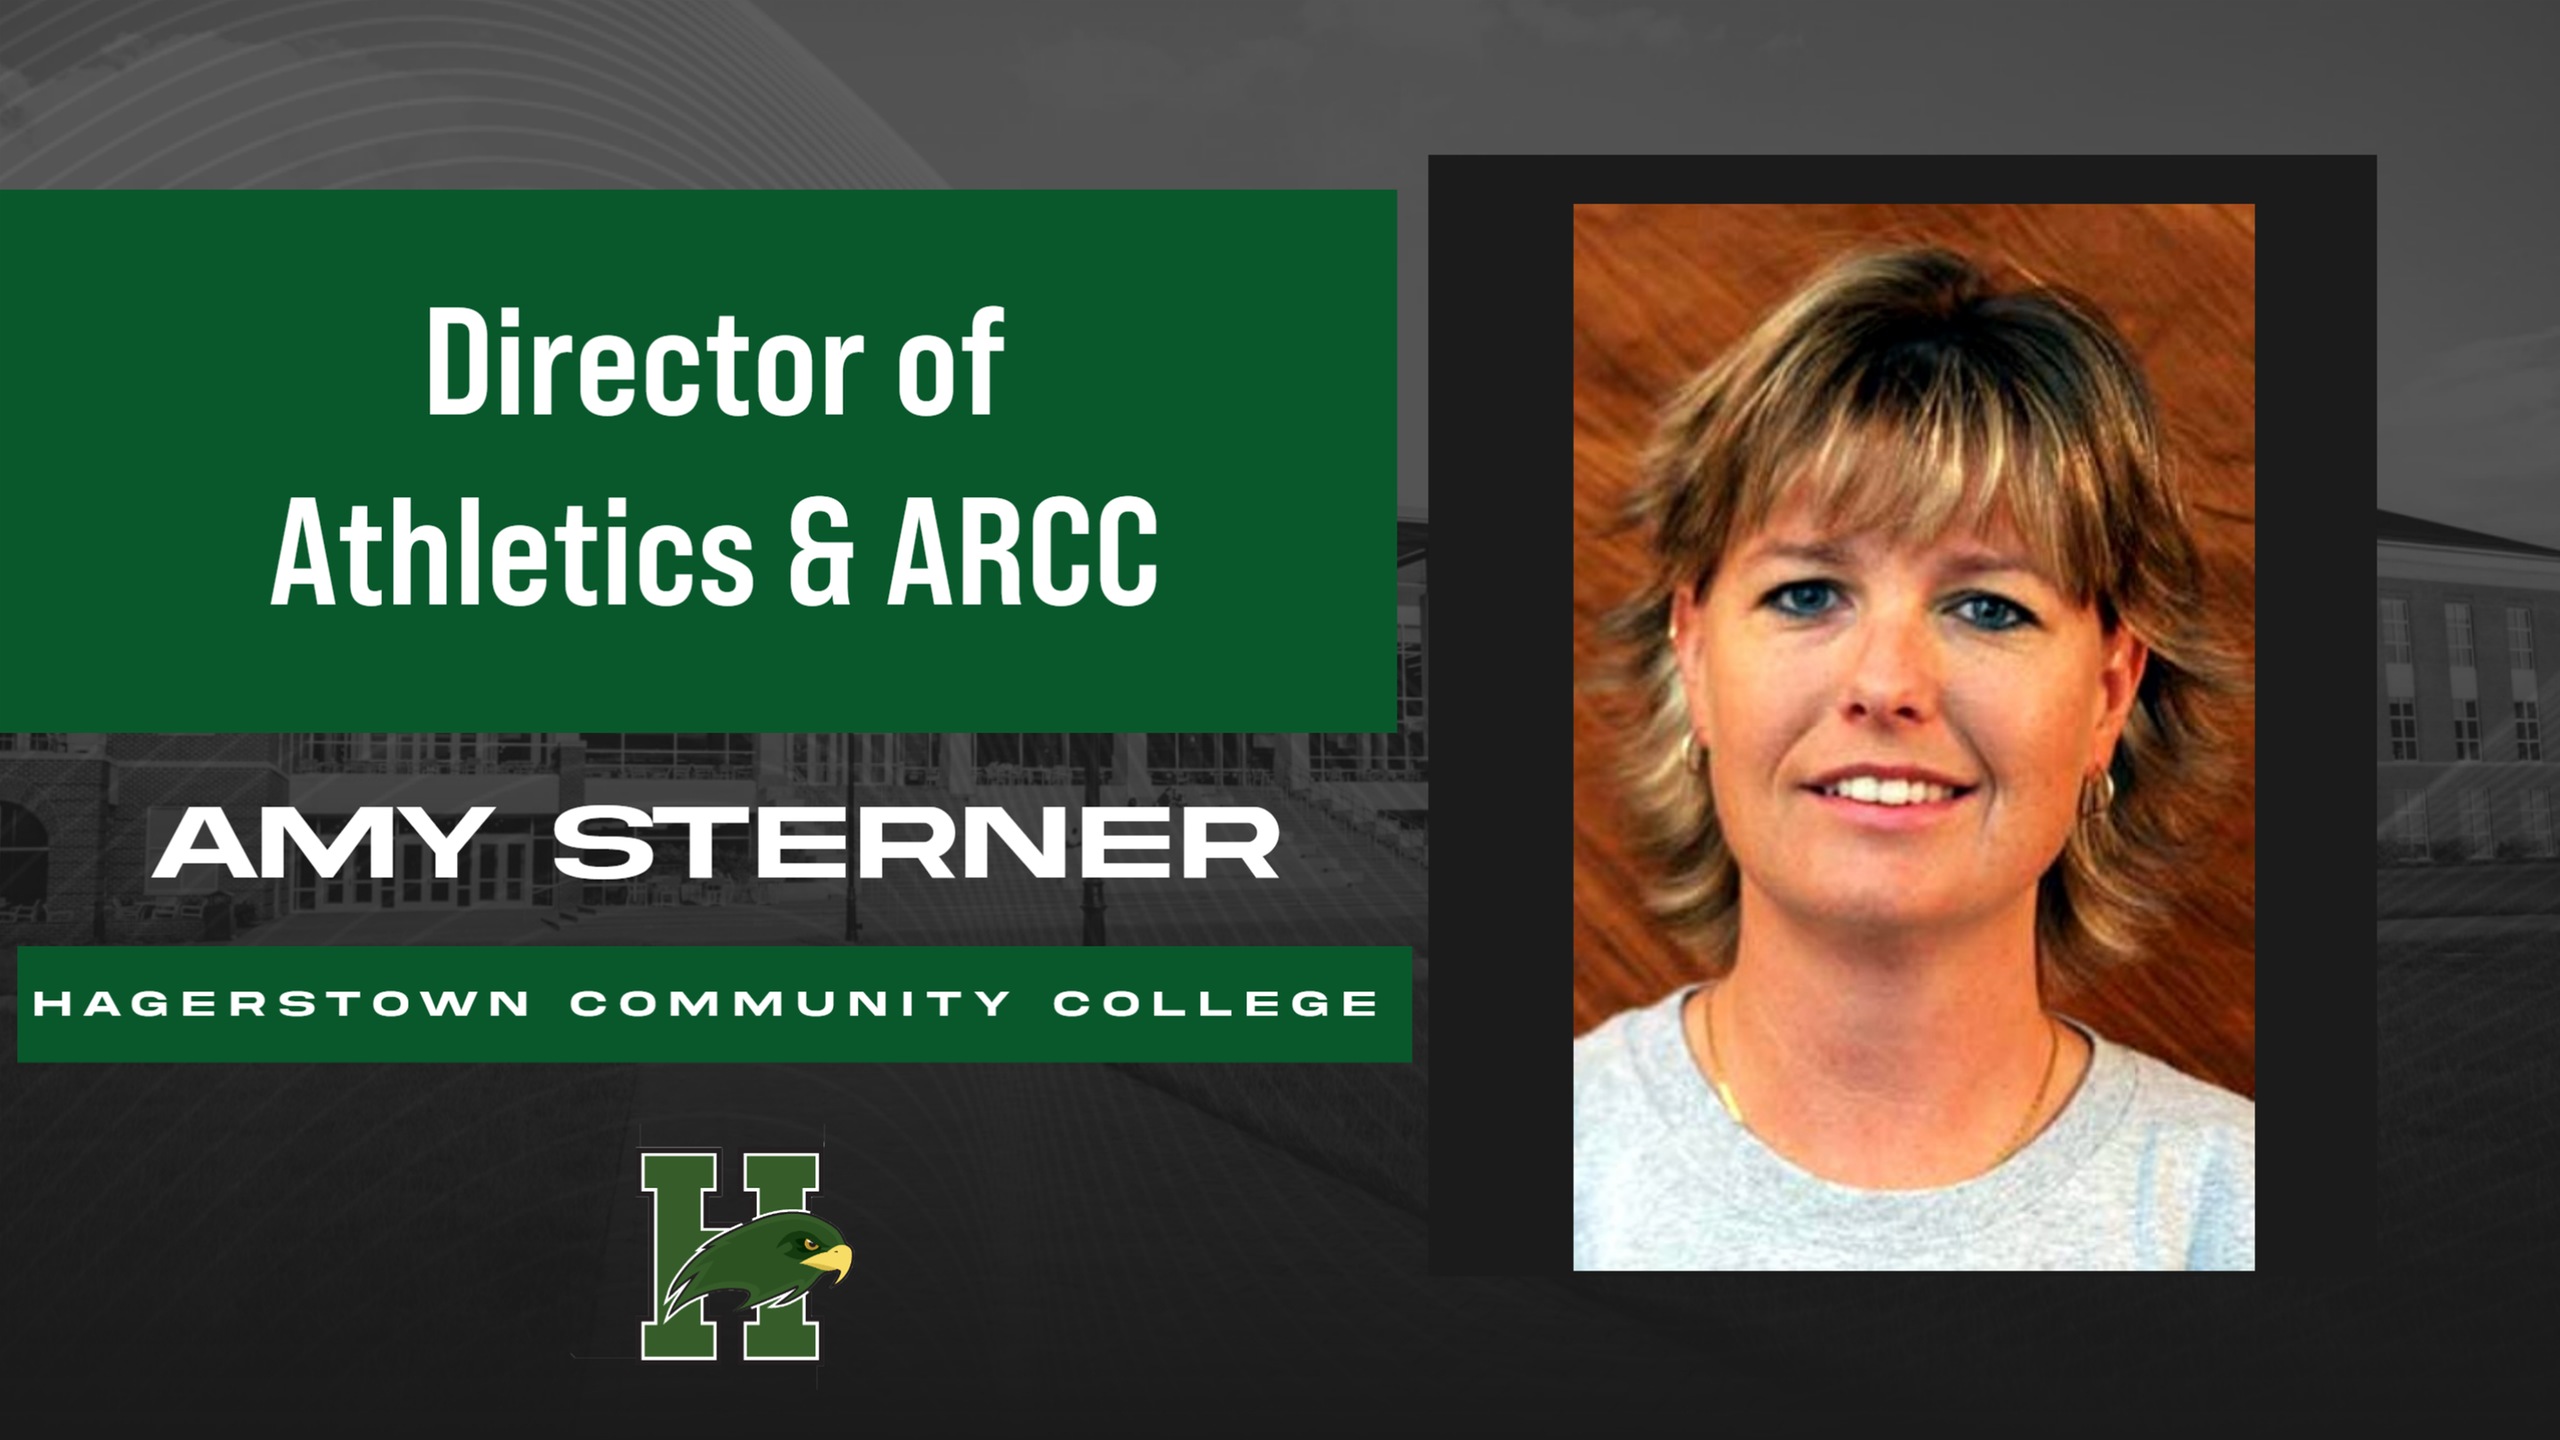 Hagerstown Announces Amy Sterner as Director of Athletics